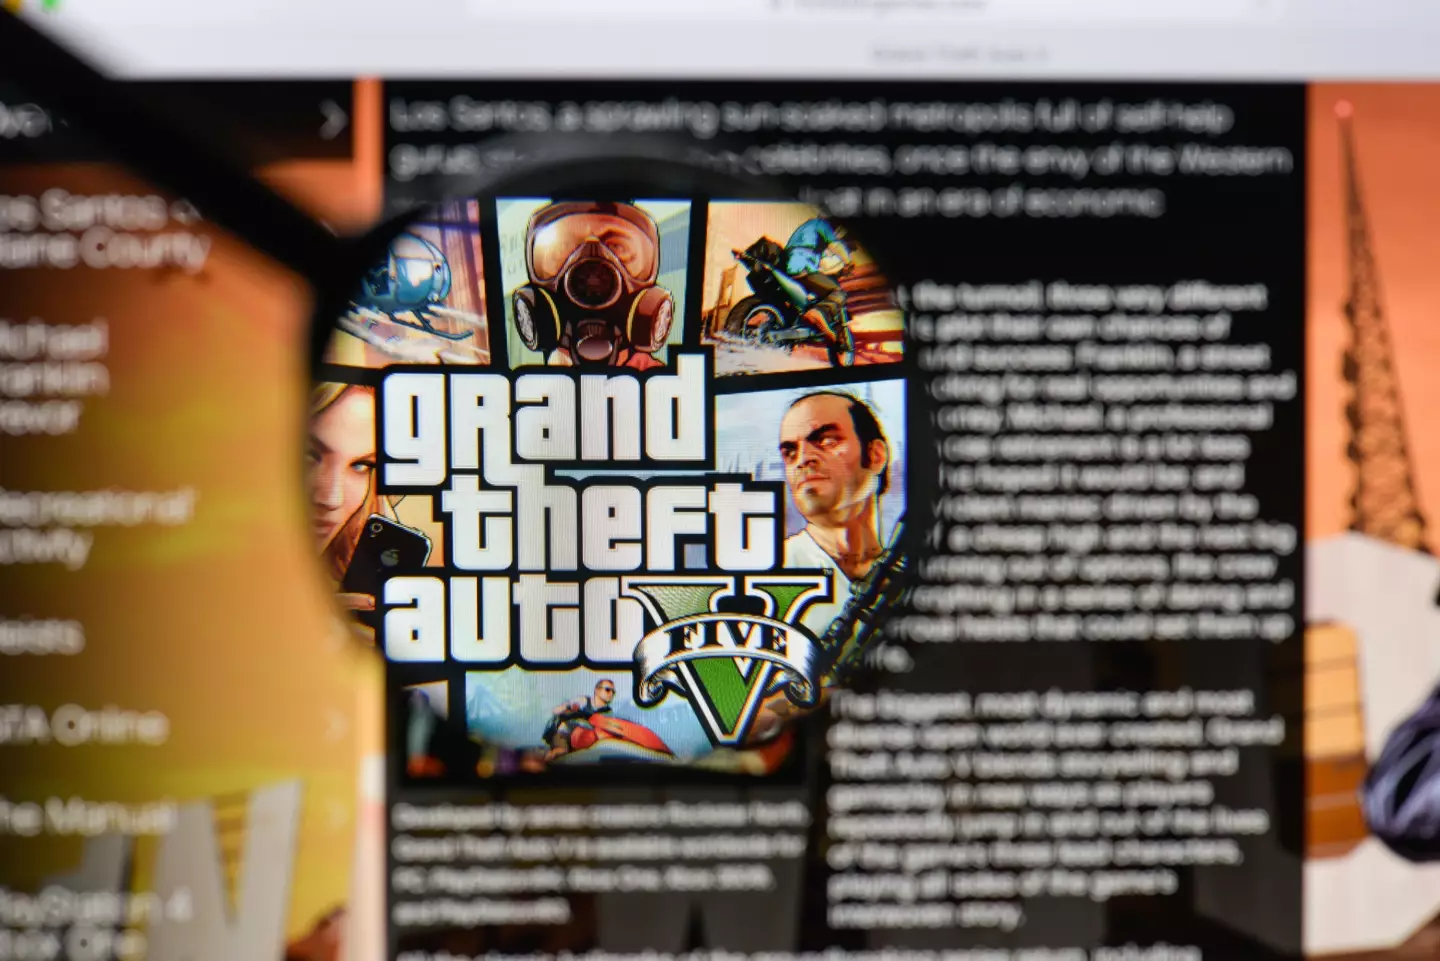 Fans are eagerly awaiting GTA VI news after the success of GTA V.